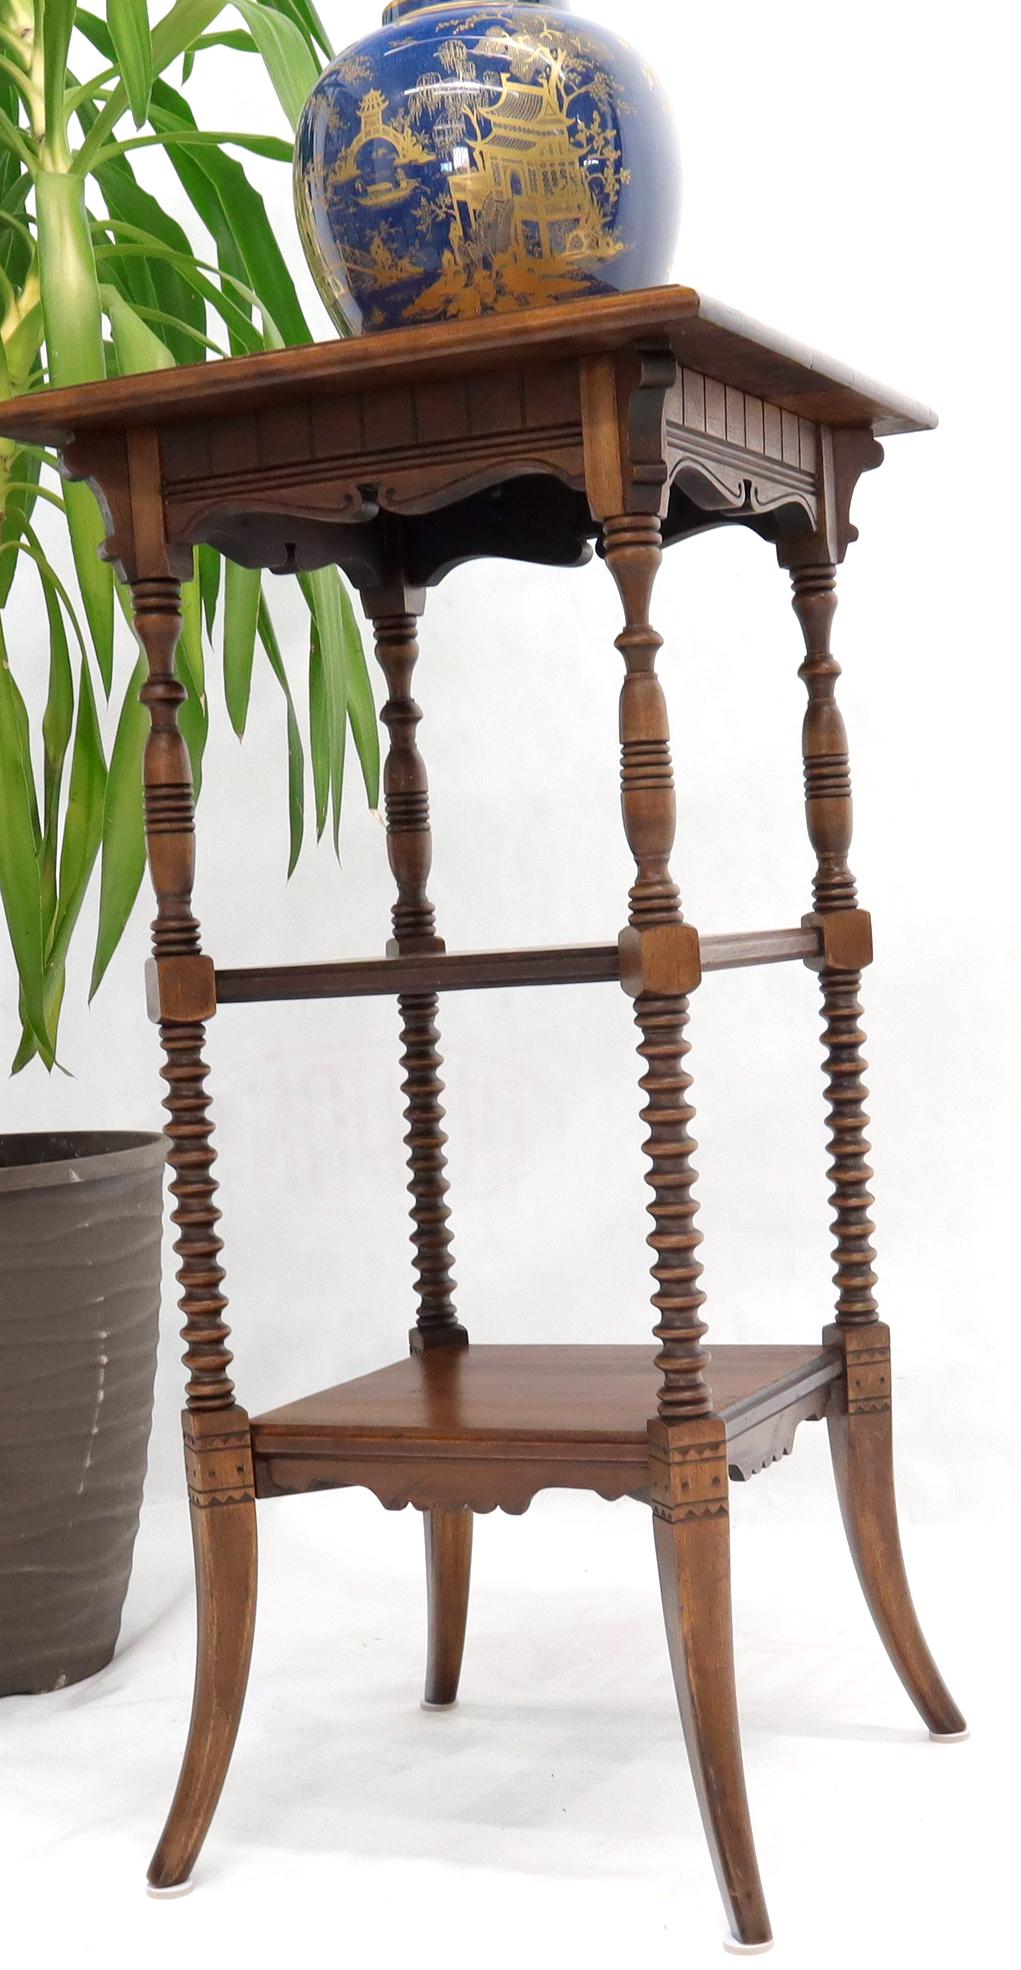 20th Century Victorian Square Three-Tier Stand Corner Lamp Occasional Table Stand For Sale